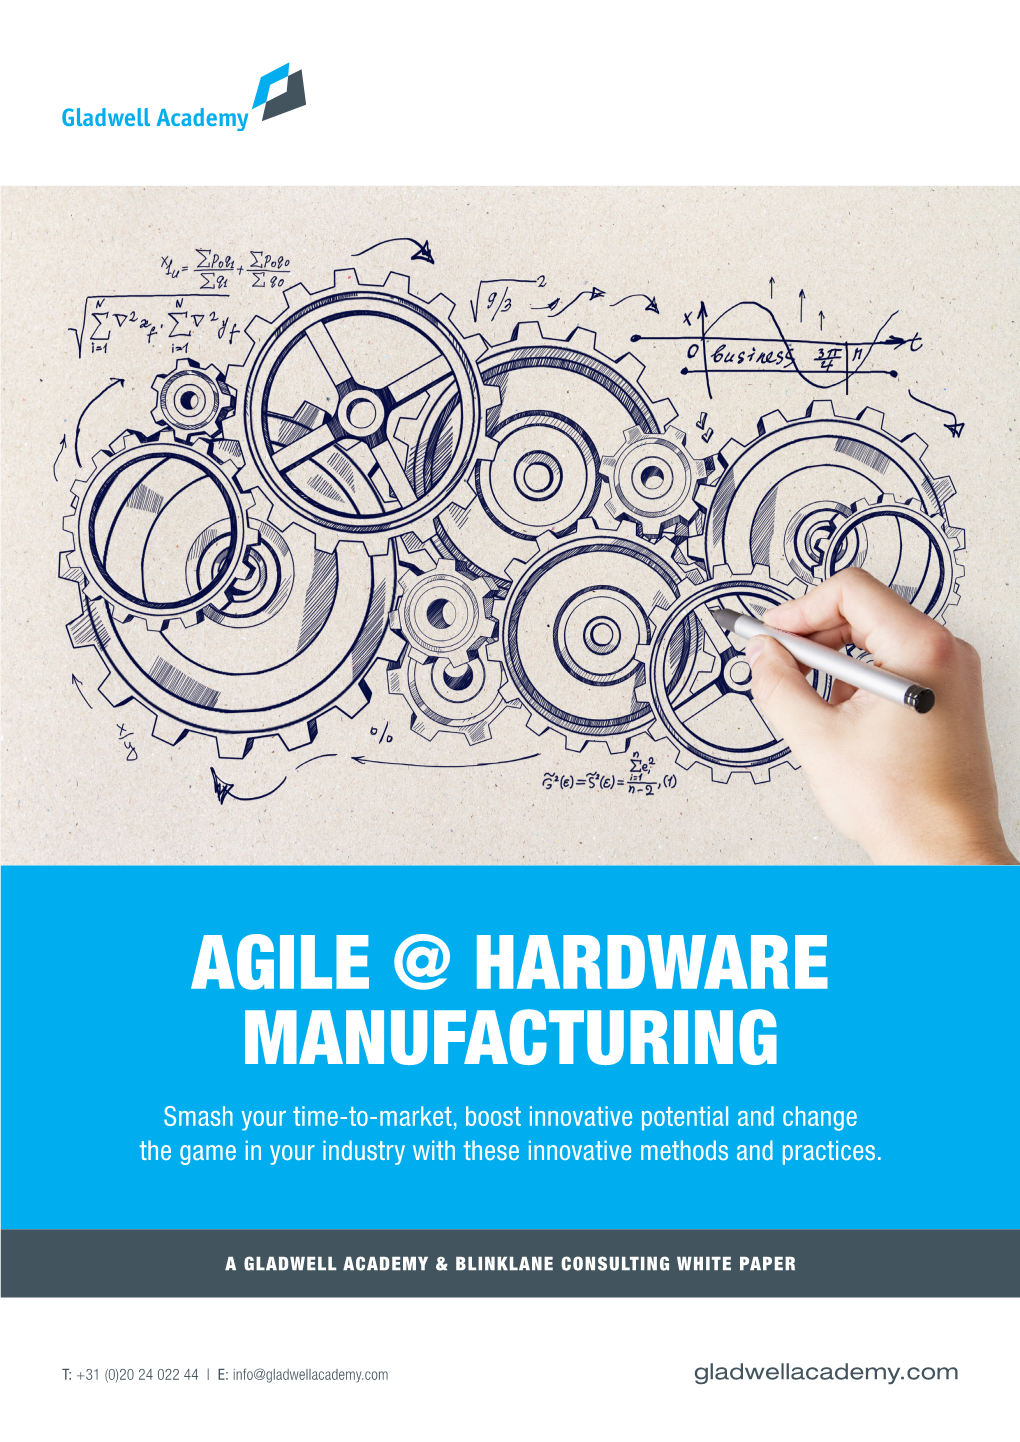 AGILE @ HARDWARE MANUFACTURING Smash Your Time-To-Market, Boost Innovative Potential and Change the Game in Your Industry with These Innovative Methods and Practices